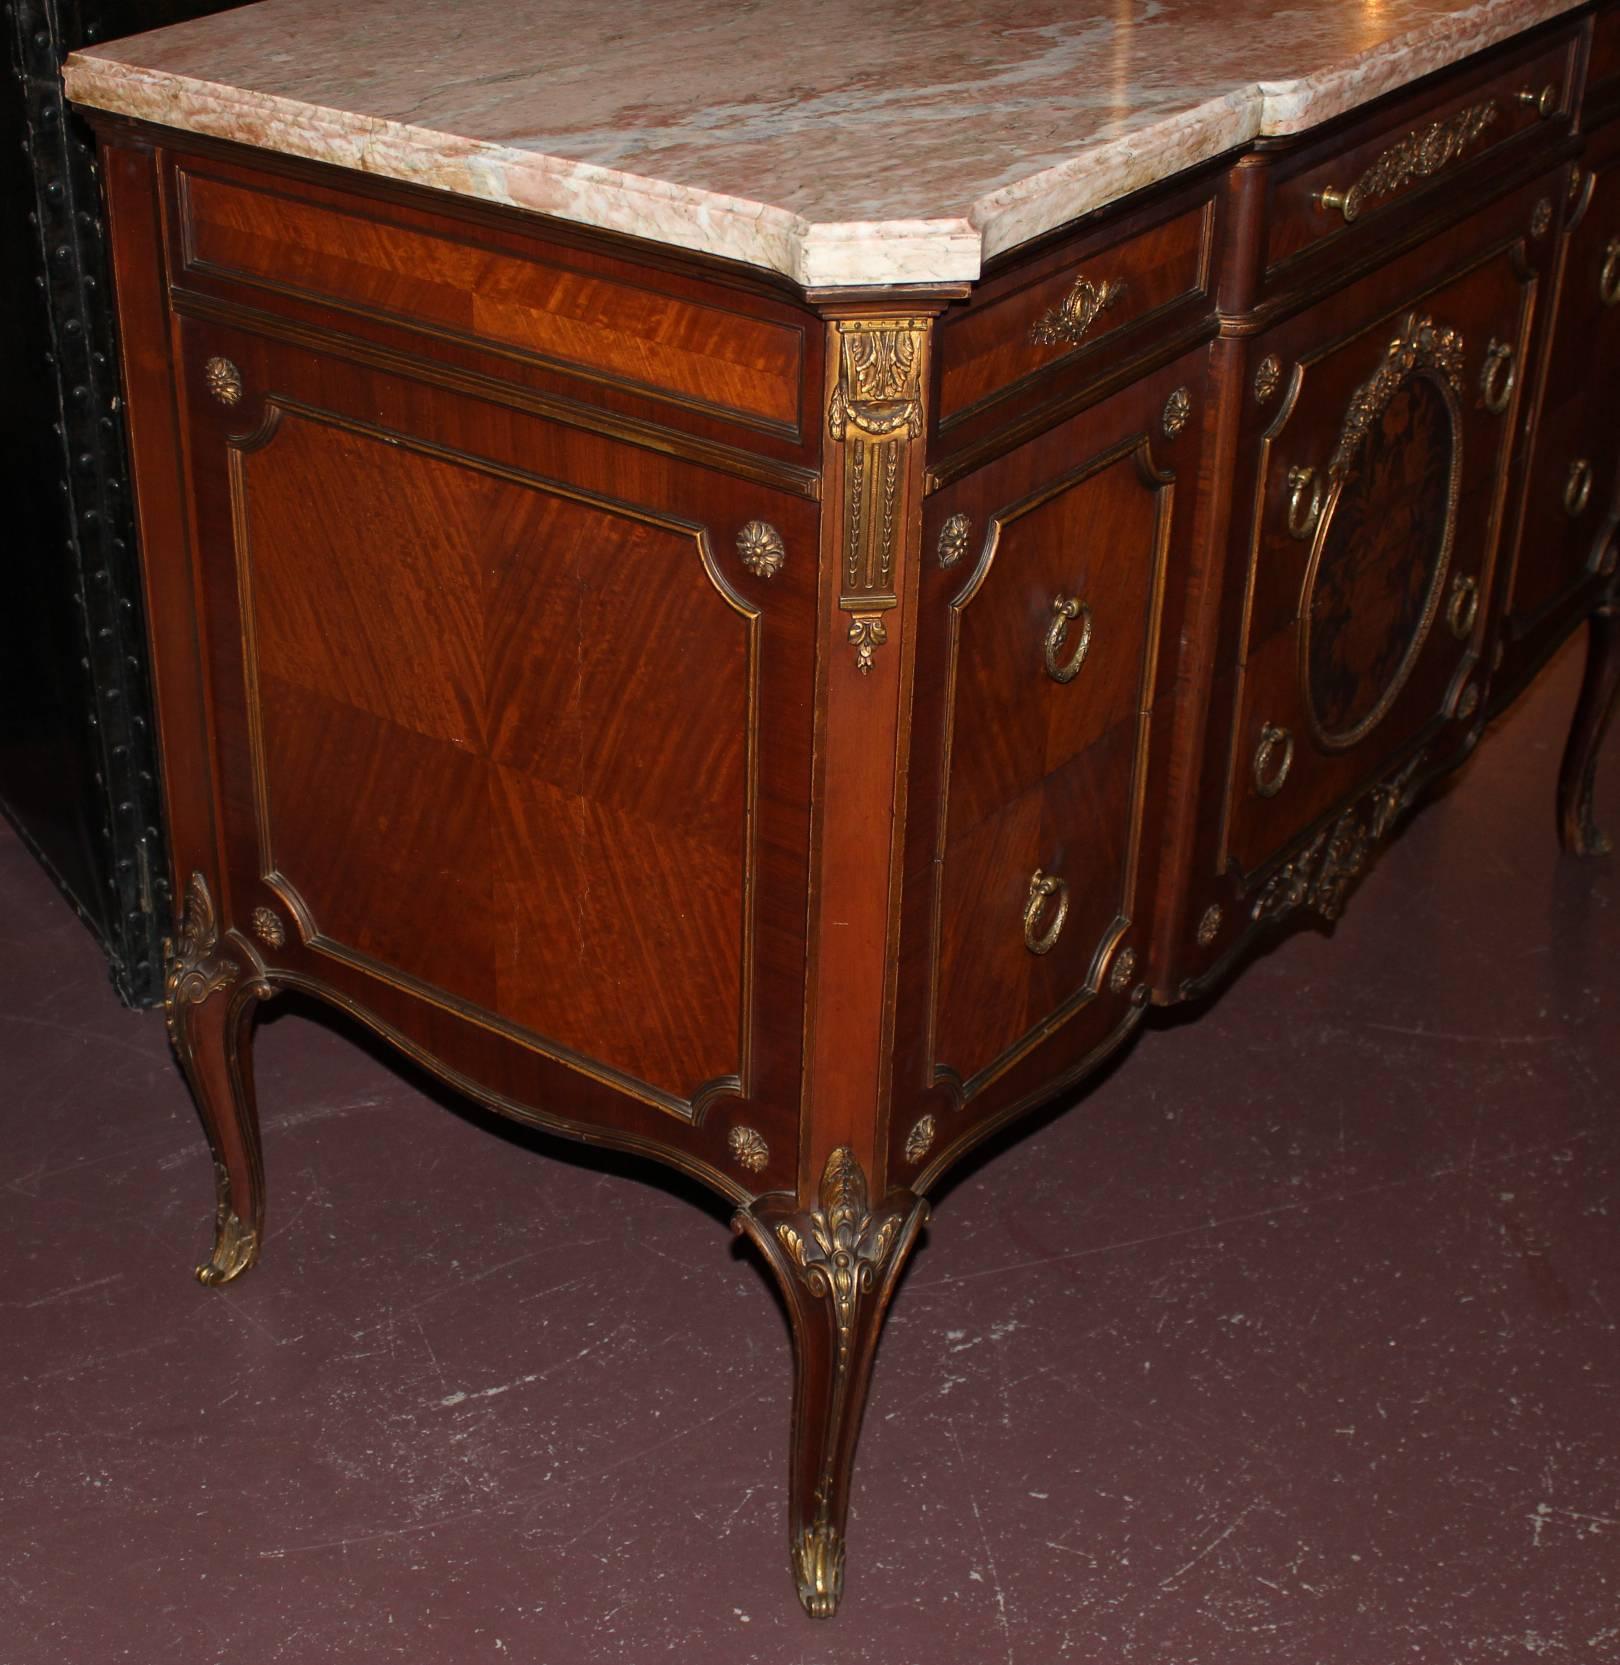 Carved Louis XV Style Kingwood Parquetry Inlaid Commode or Chest with Rouge Marble Top